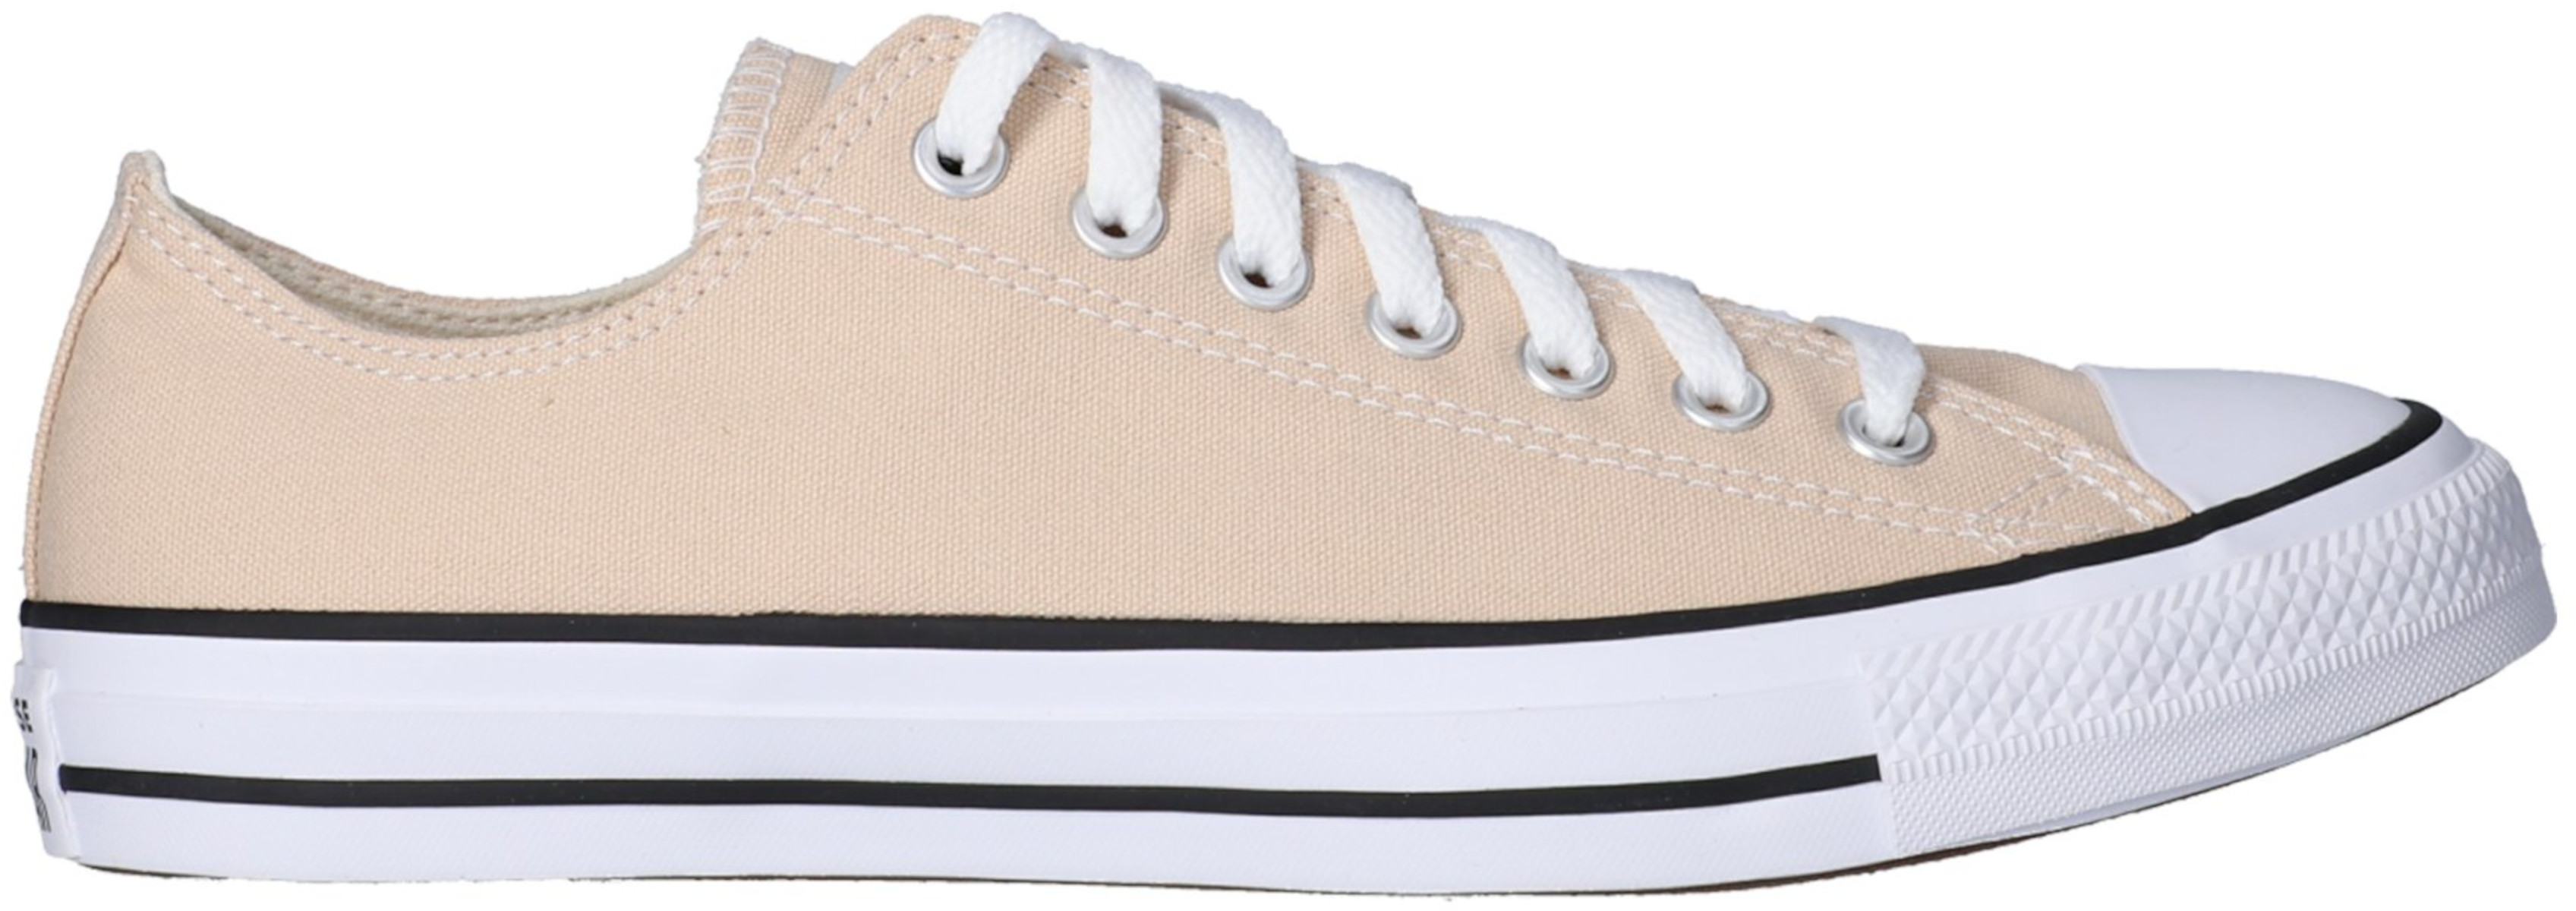 Shoes Converse chuck taylor all star ox sneaker